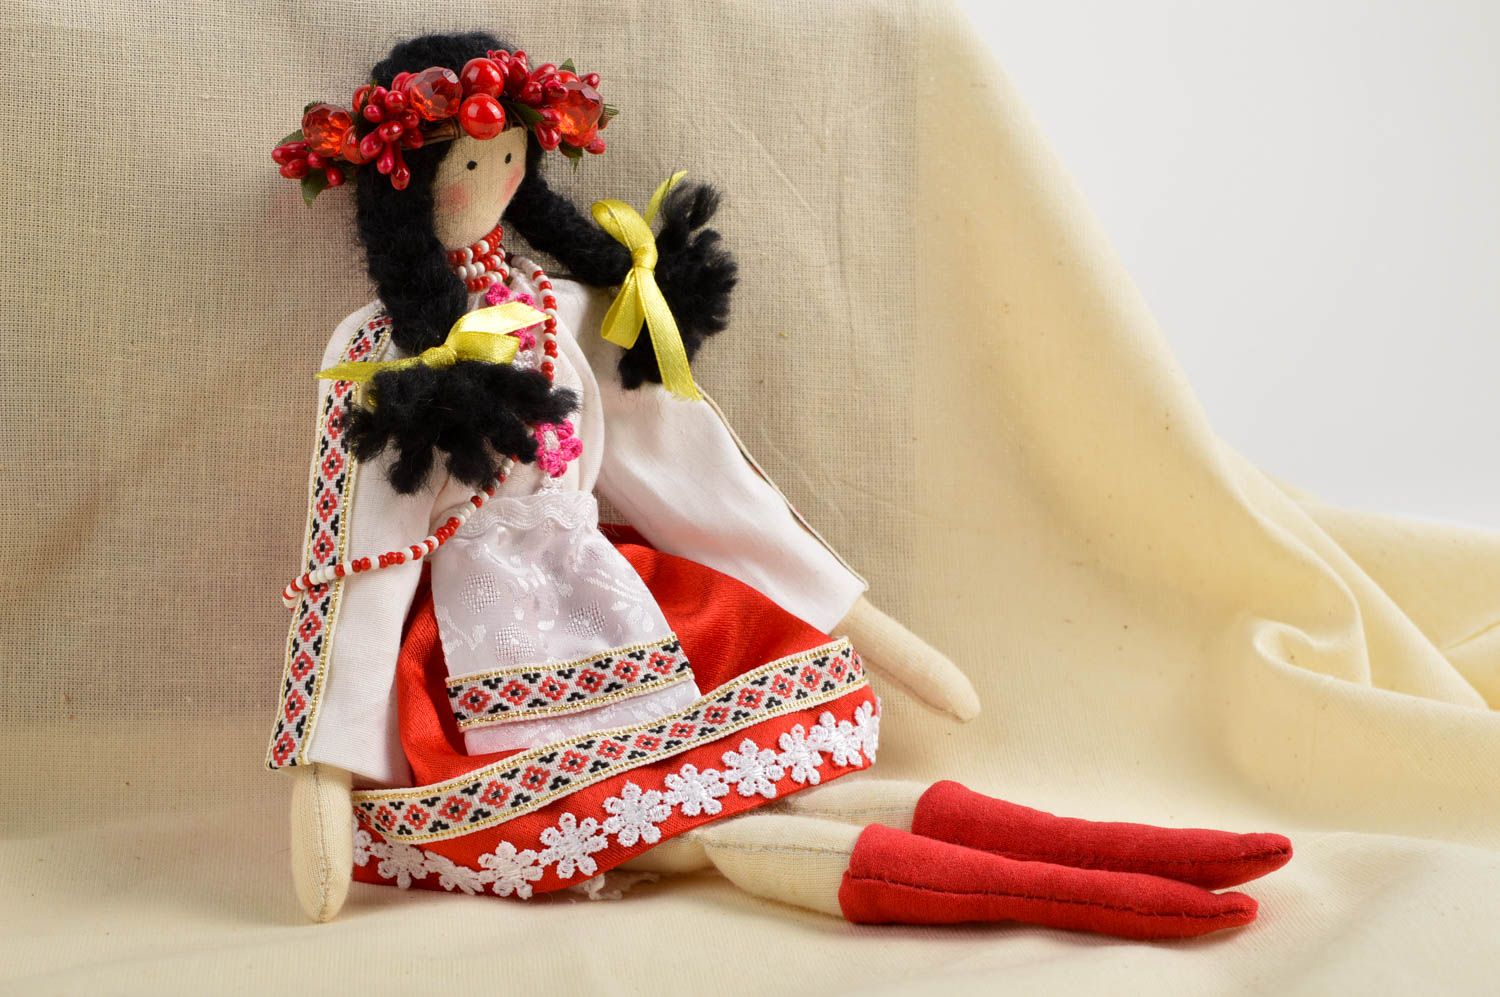 Handmade doll toy in national costume designer childrens toy decoration ideas photo 1